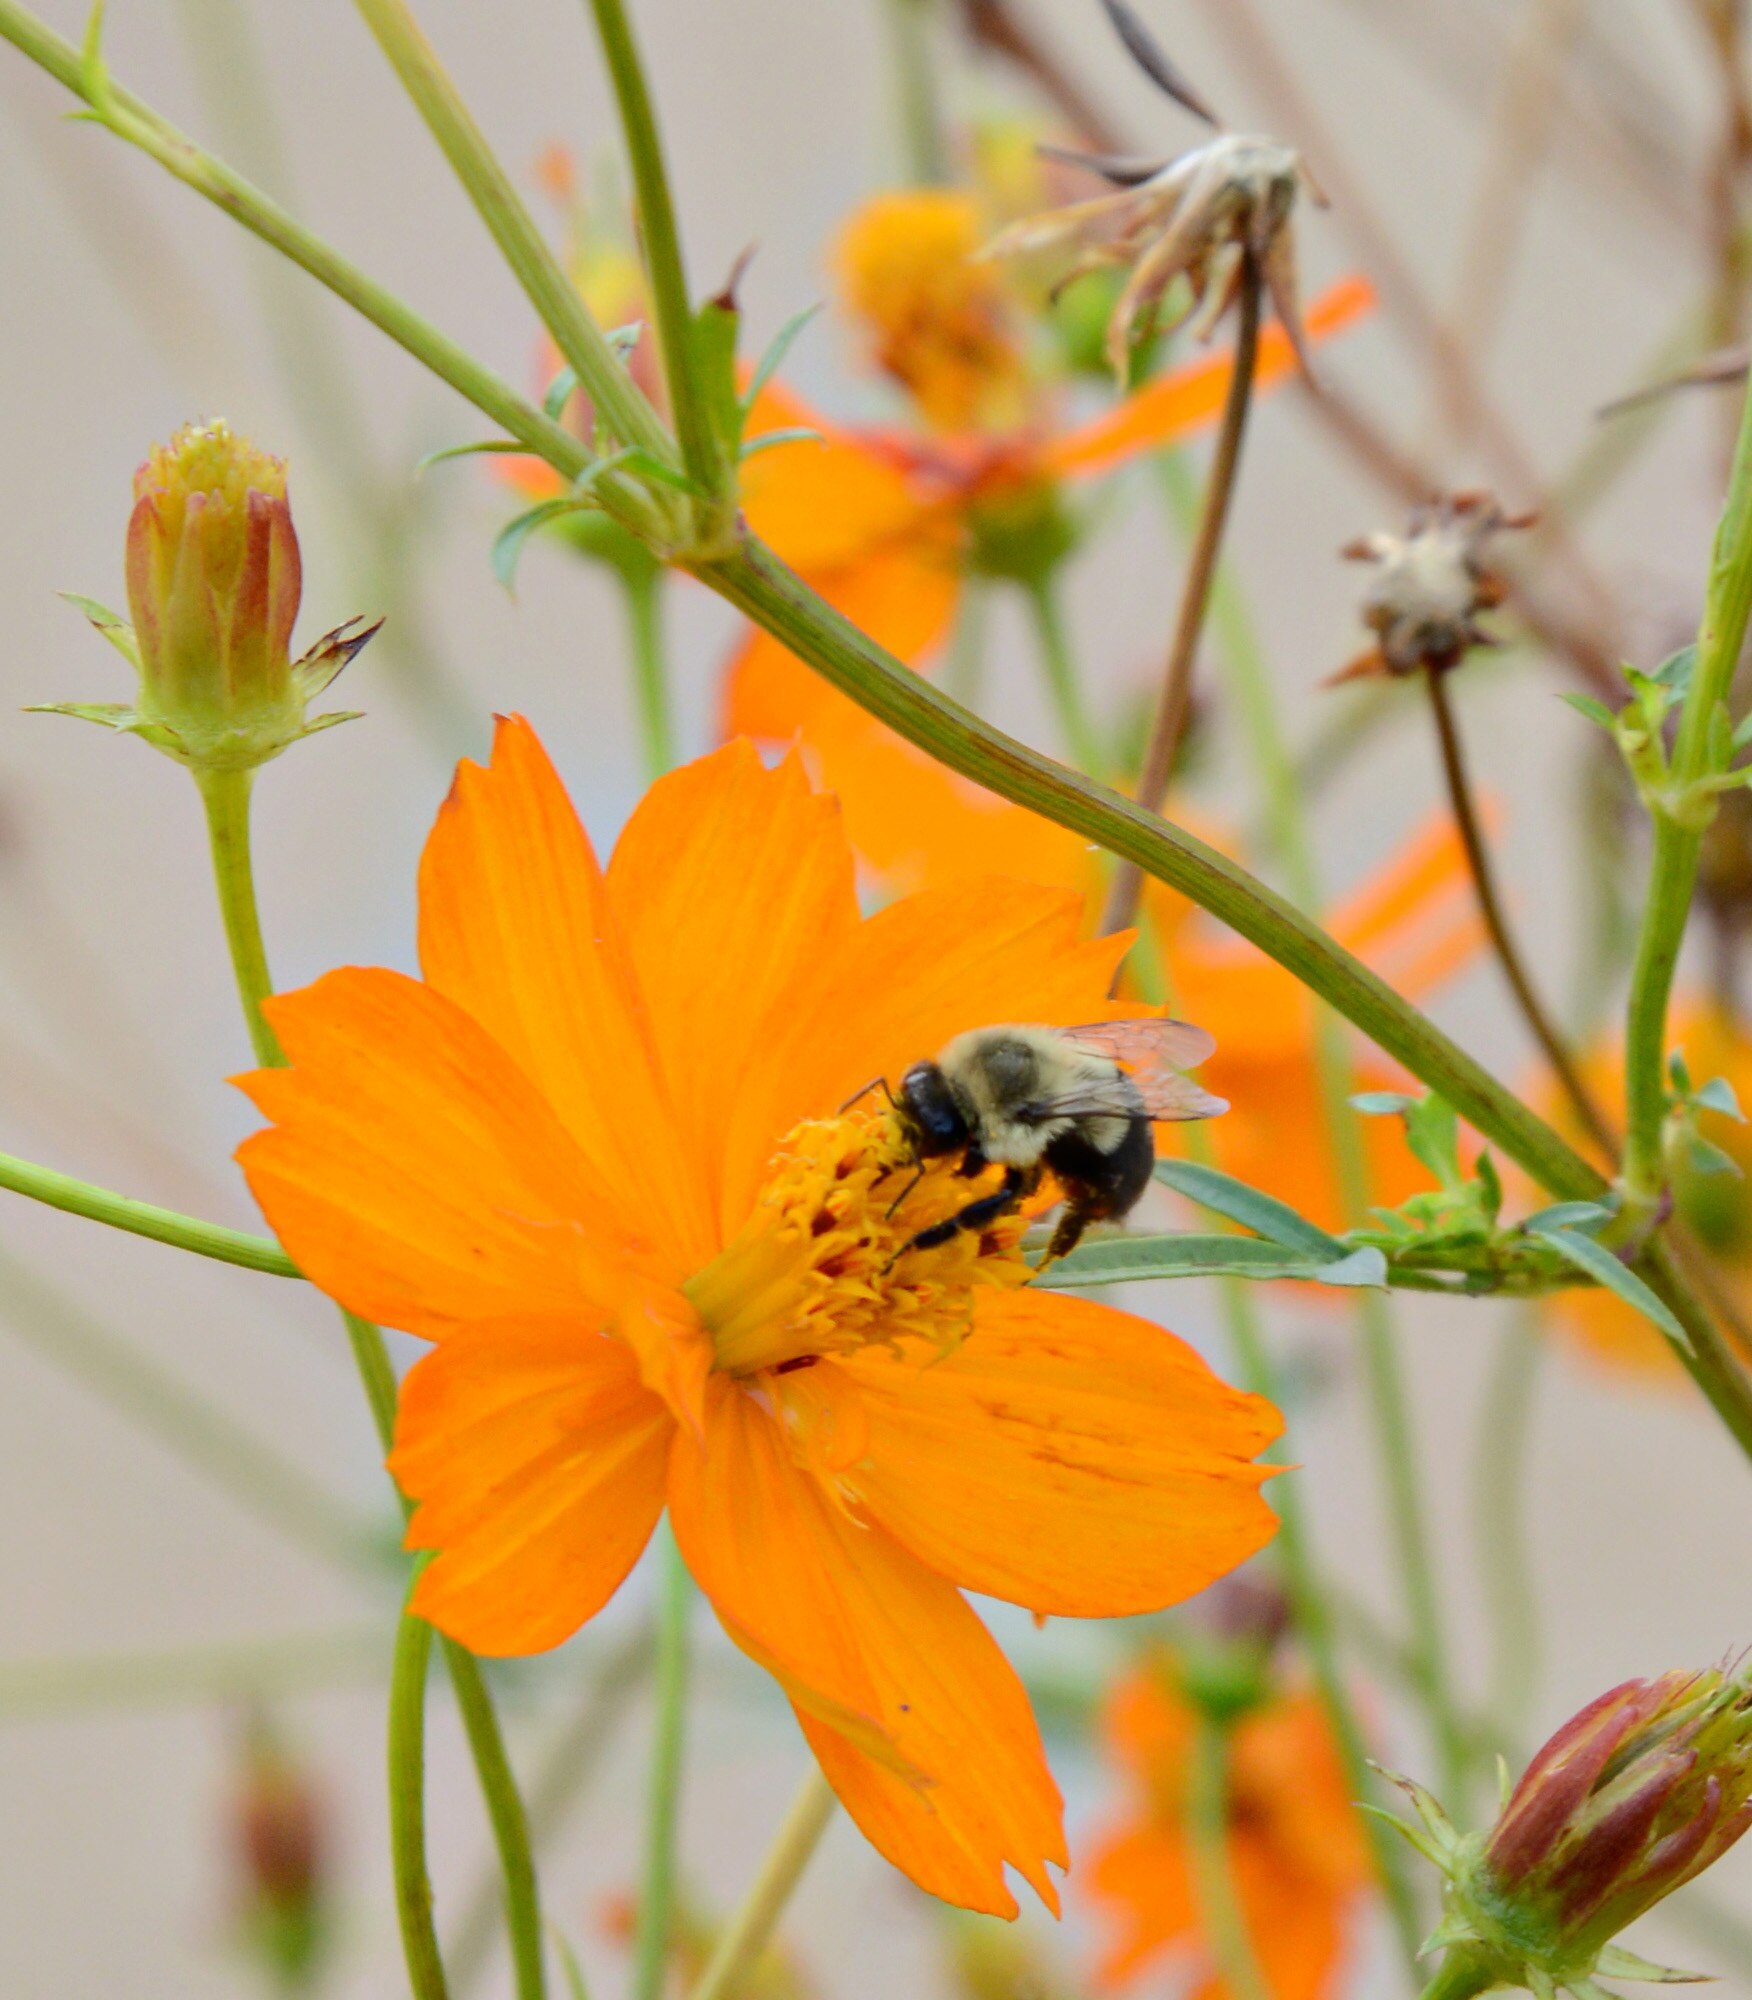 An American bumble bee pollinates a flower here at Tinker. This season, John Lee is working closely with the 72nd Civil Engineering Directorate’s Natural Resources office to find and identify mainly monarch butterflies and bumblebees to help protect them. (Air Force photo by Kelly White)